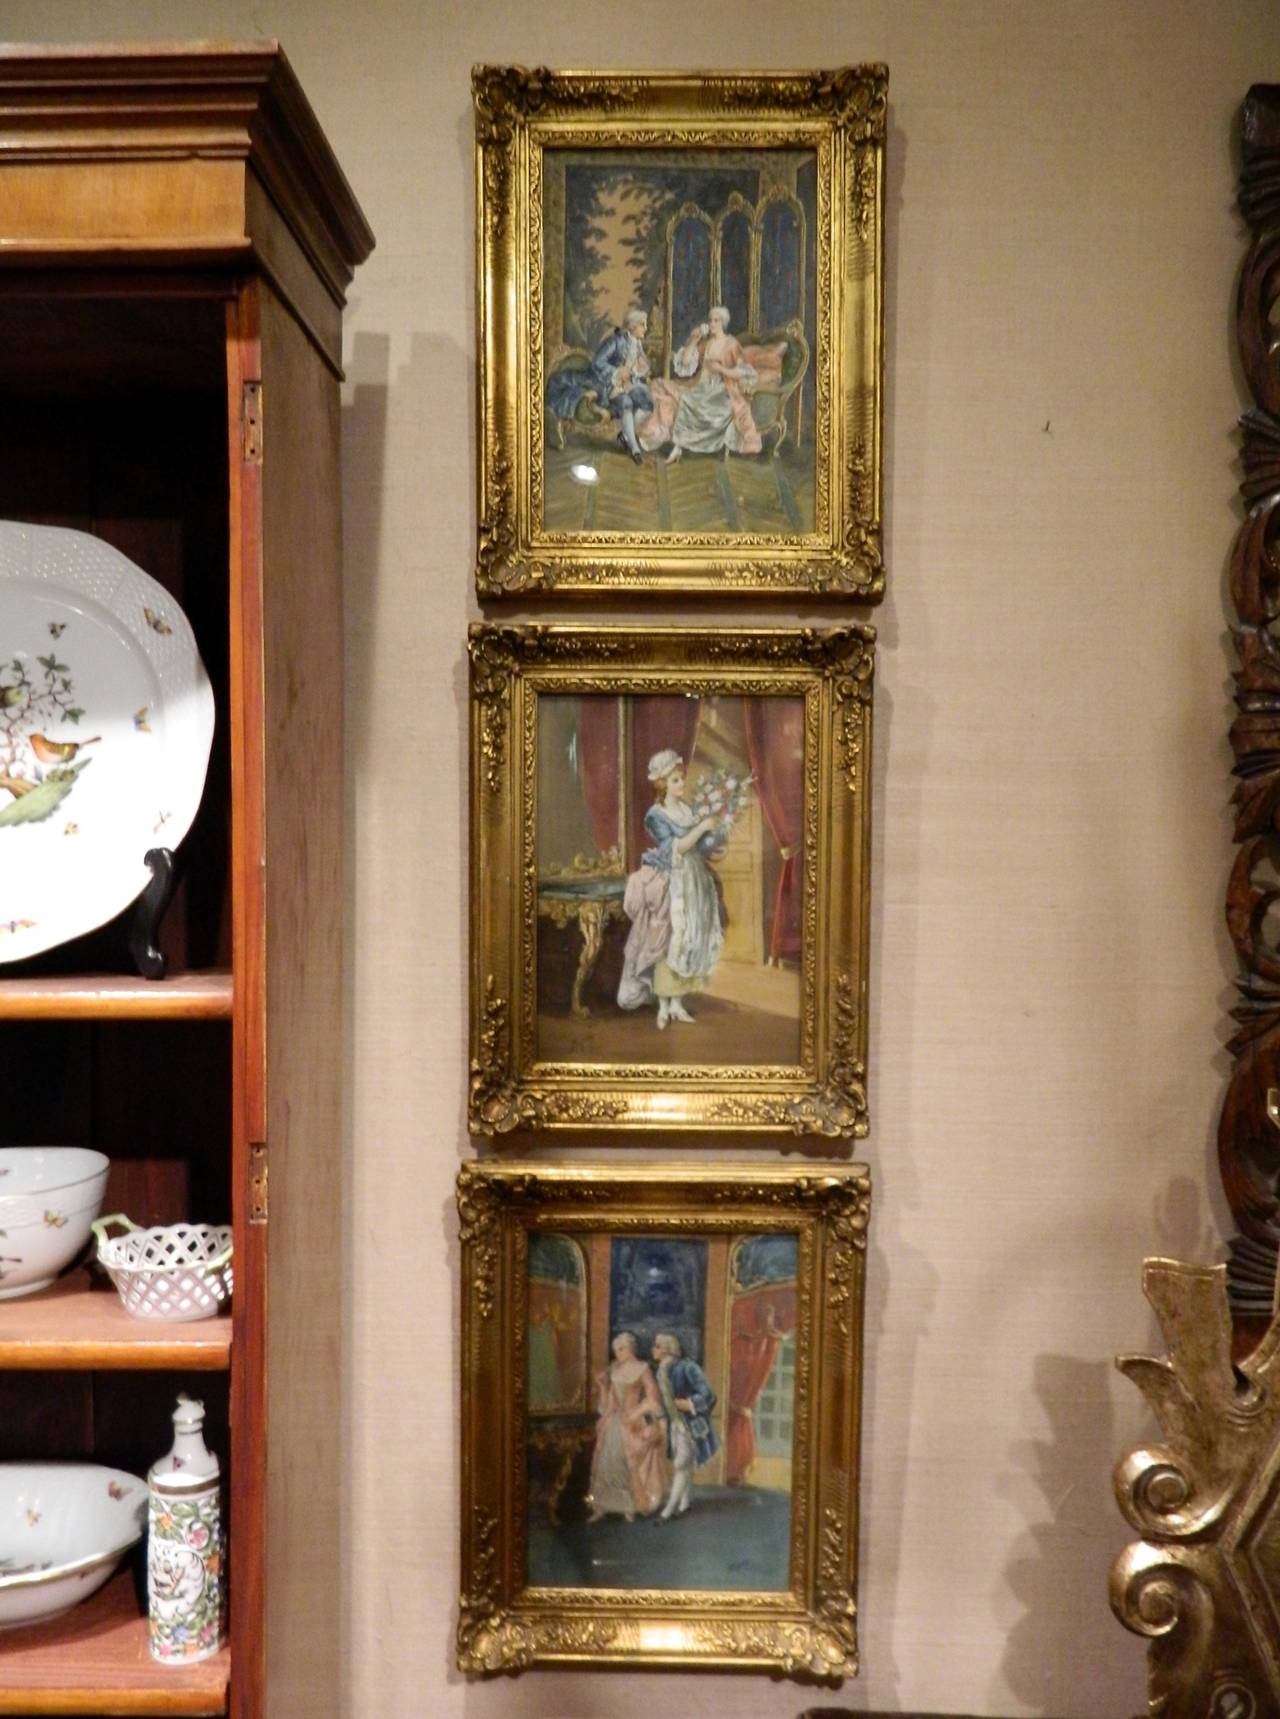 Set of Three Framed Watercolor Paintings Depicting French Romantic Interior Scenes, Signed 